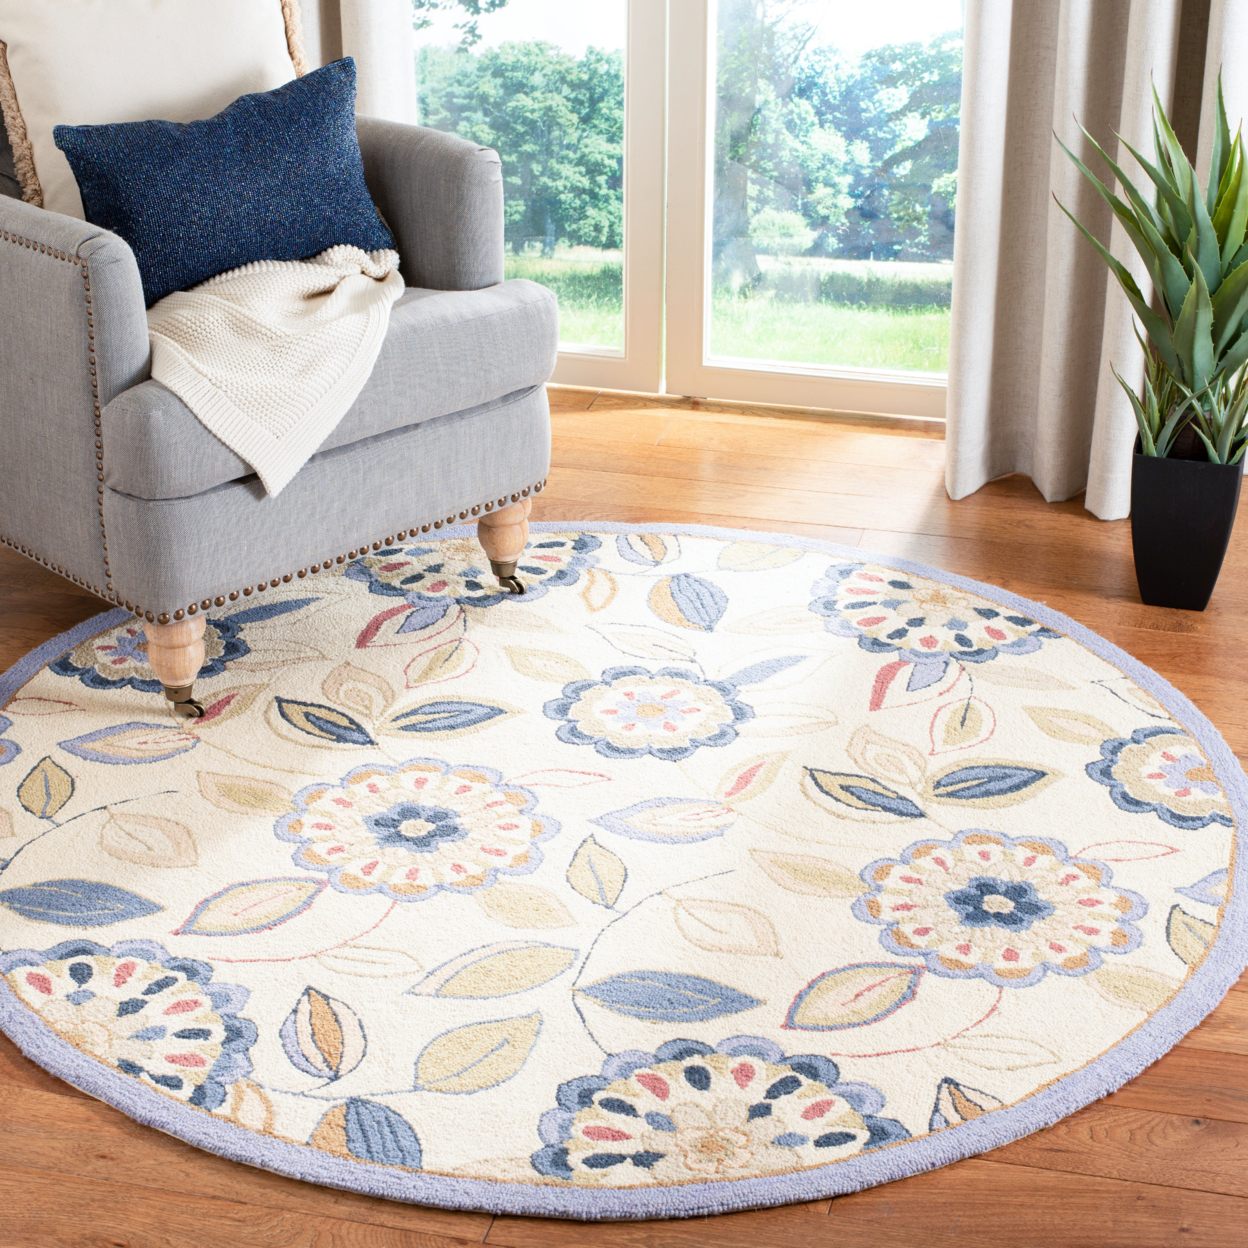 SAFAVIEH Chelsea HK179A Hand-hooked Ivory / Blue Rug - 4' Round